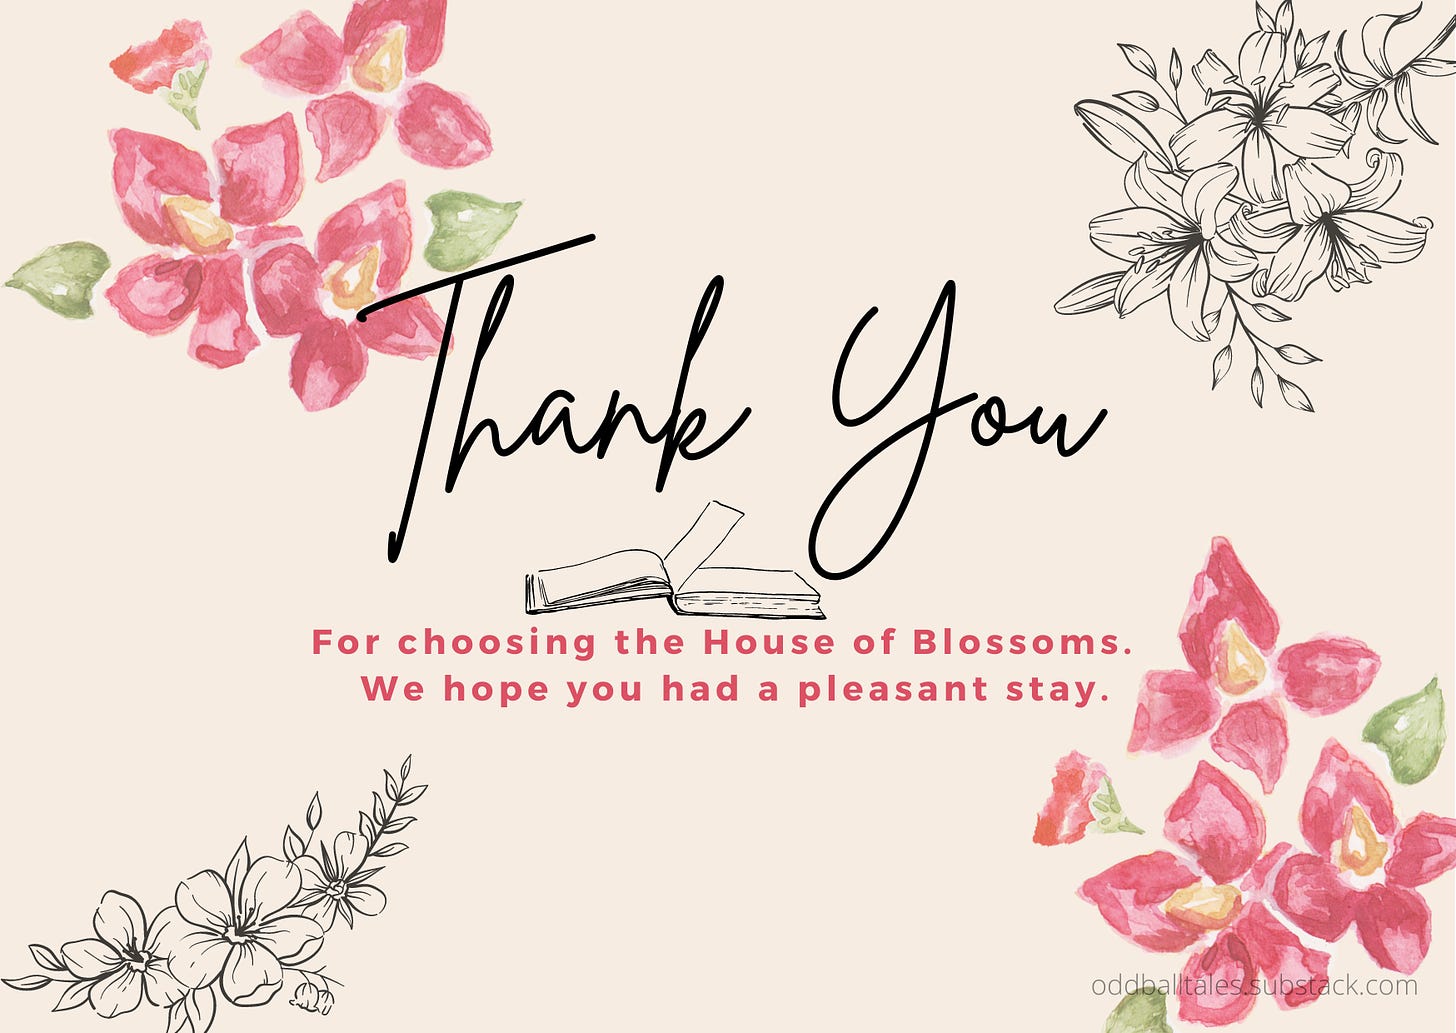 Thank you for choosing the house of blossoms. We hope you had a pleasant stay.